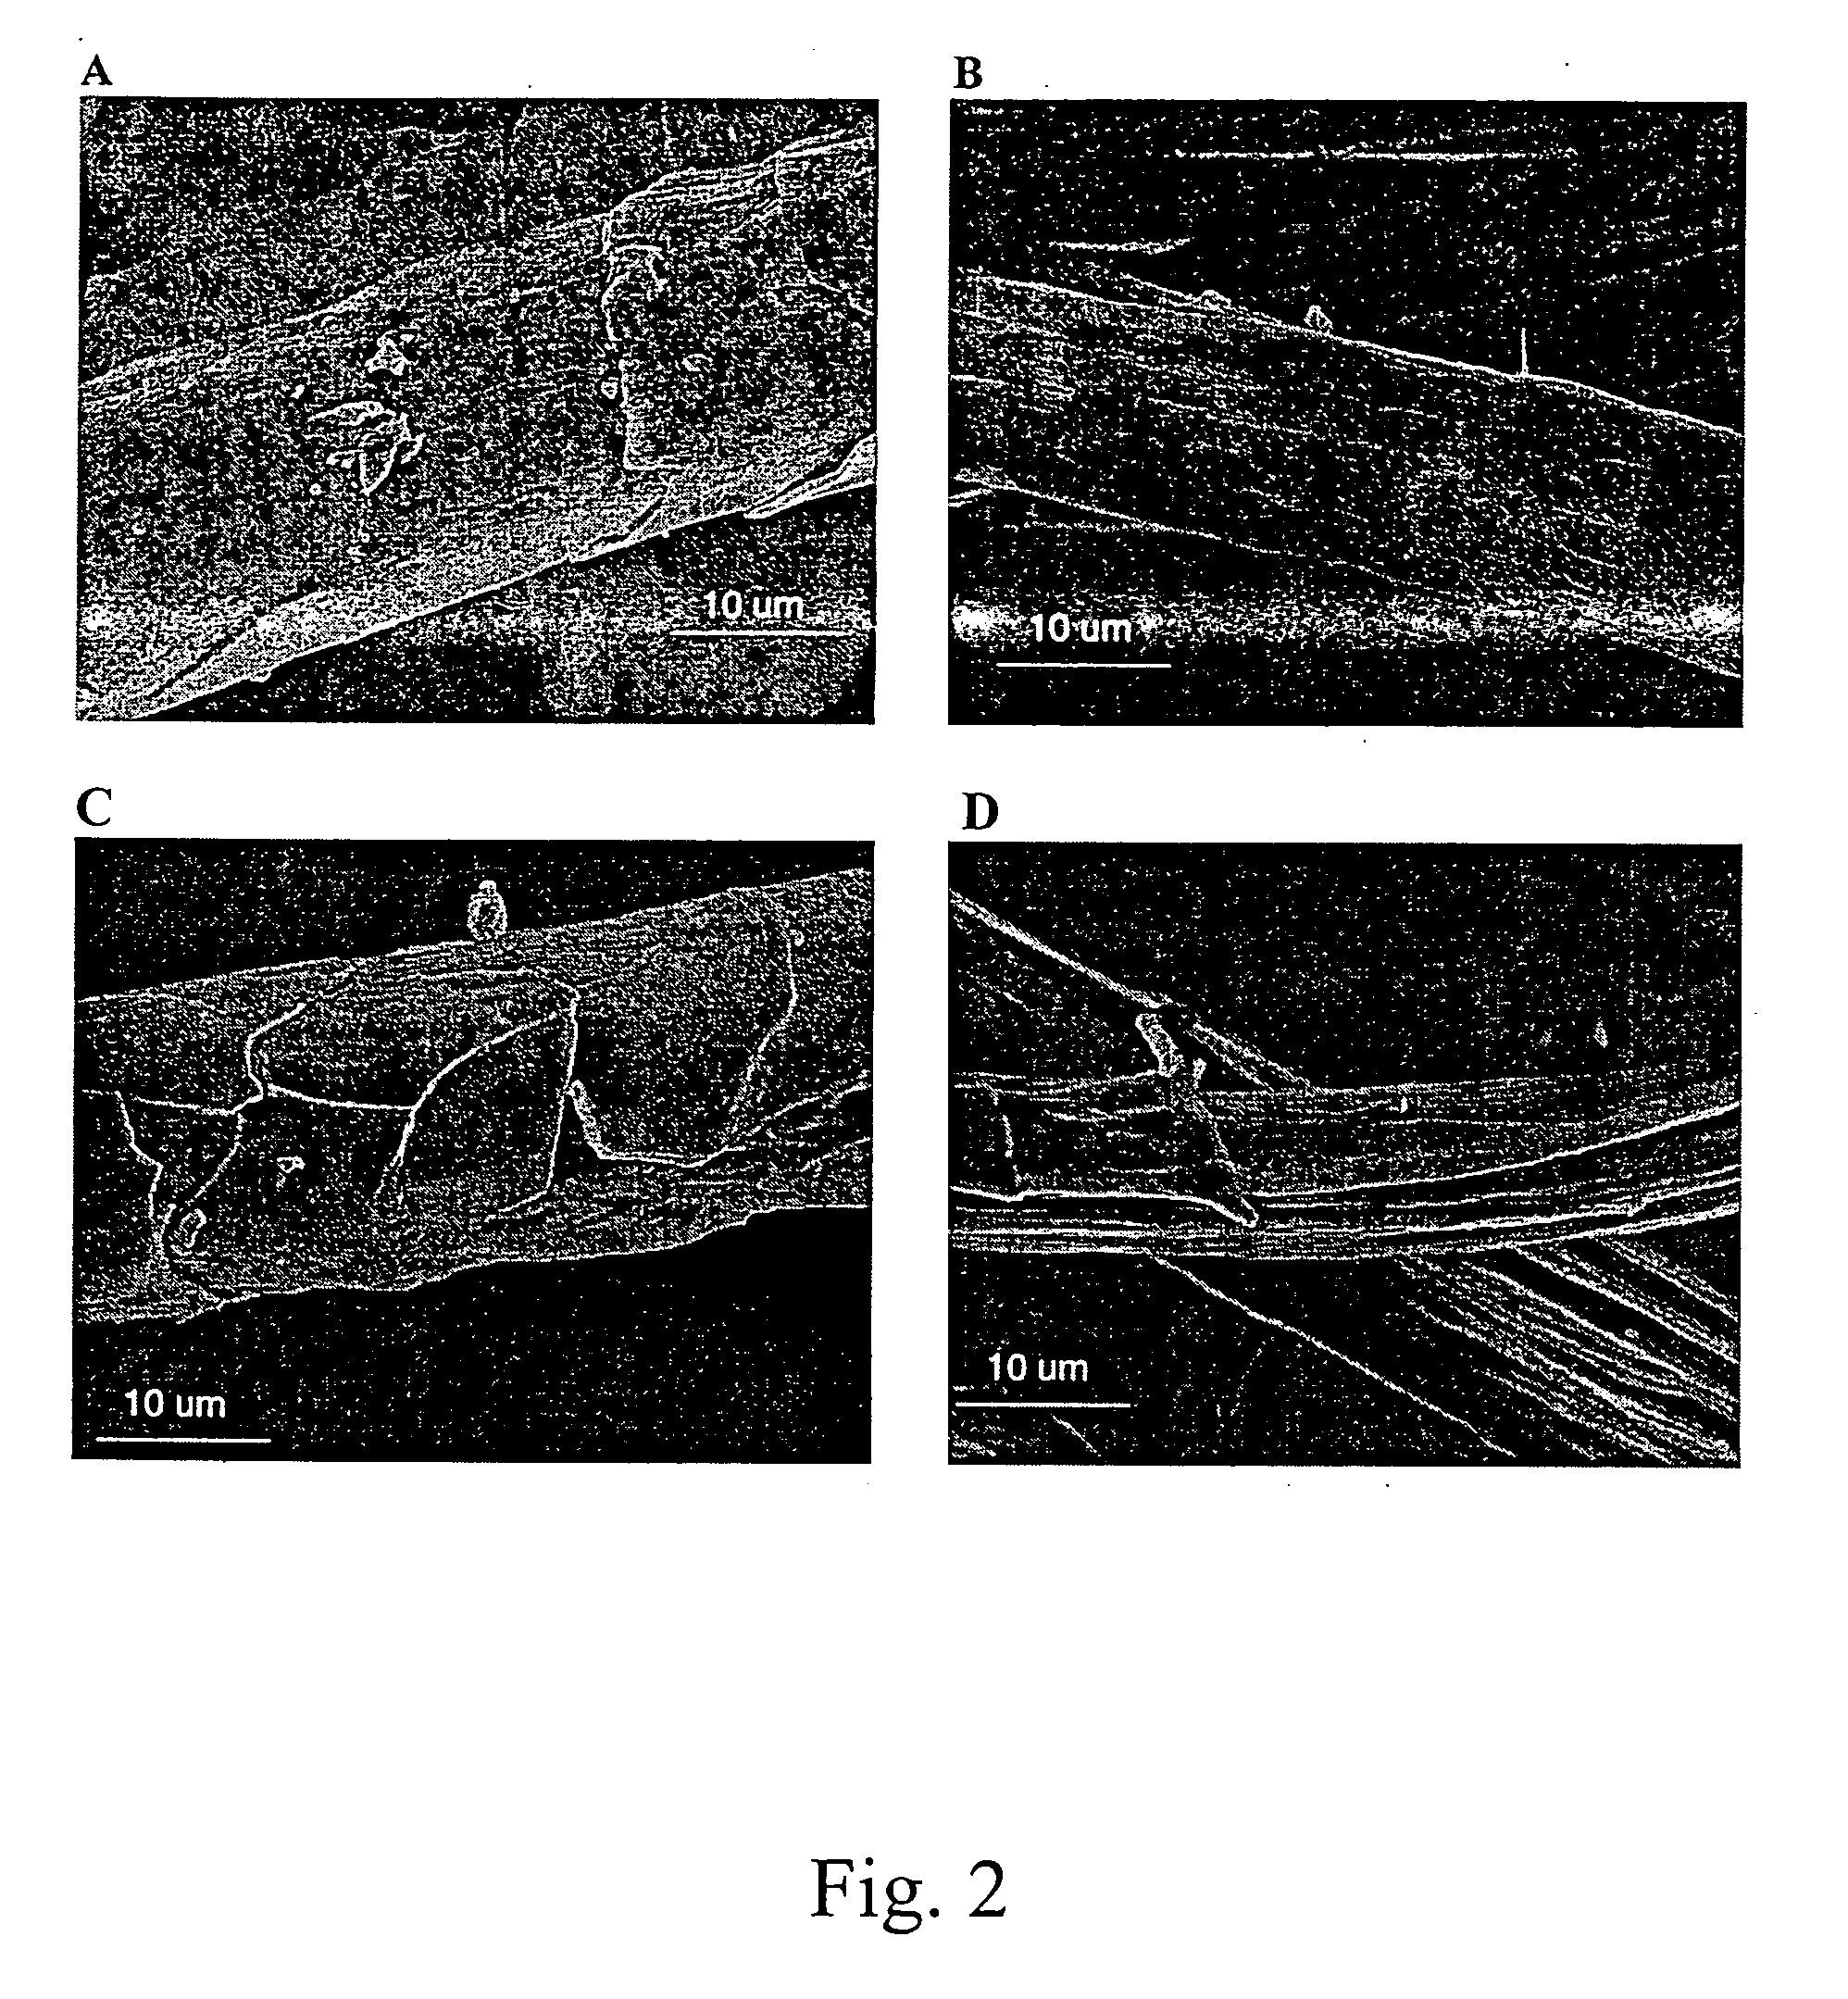 Methods of improving shrink-resistance of natural fibers, synthetic fibers, or mixtures thereof, or fabric or yarn composed of natural fibers, synthetic fibers, or mixtures thereof